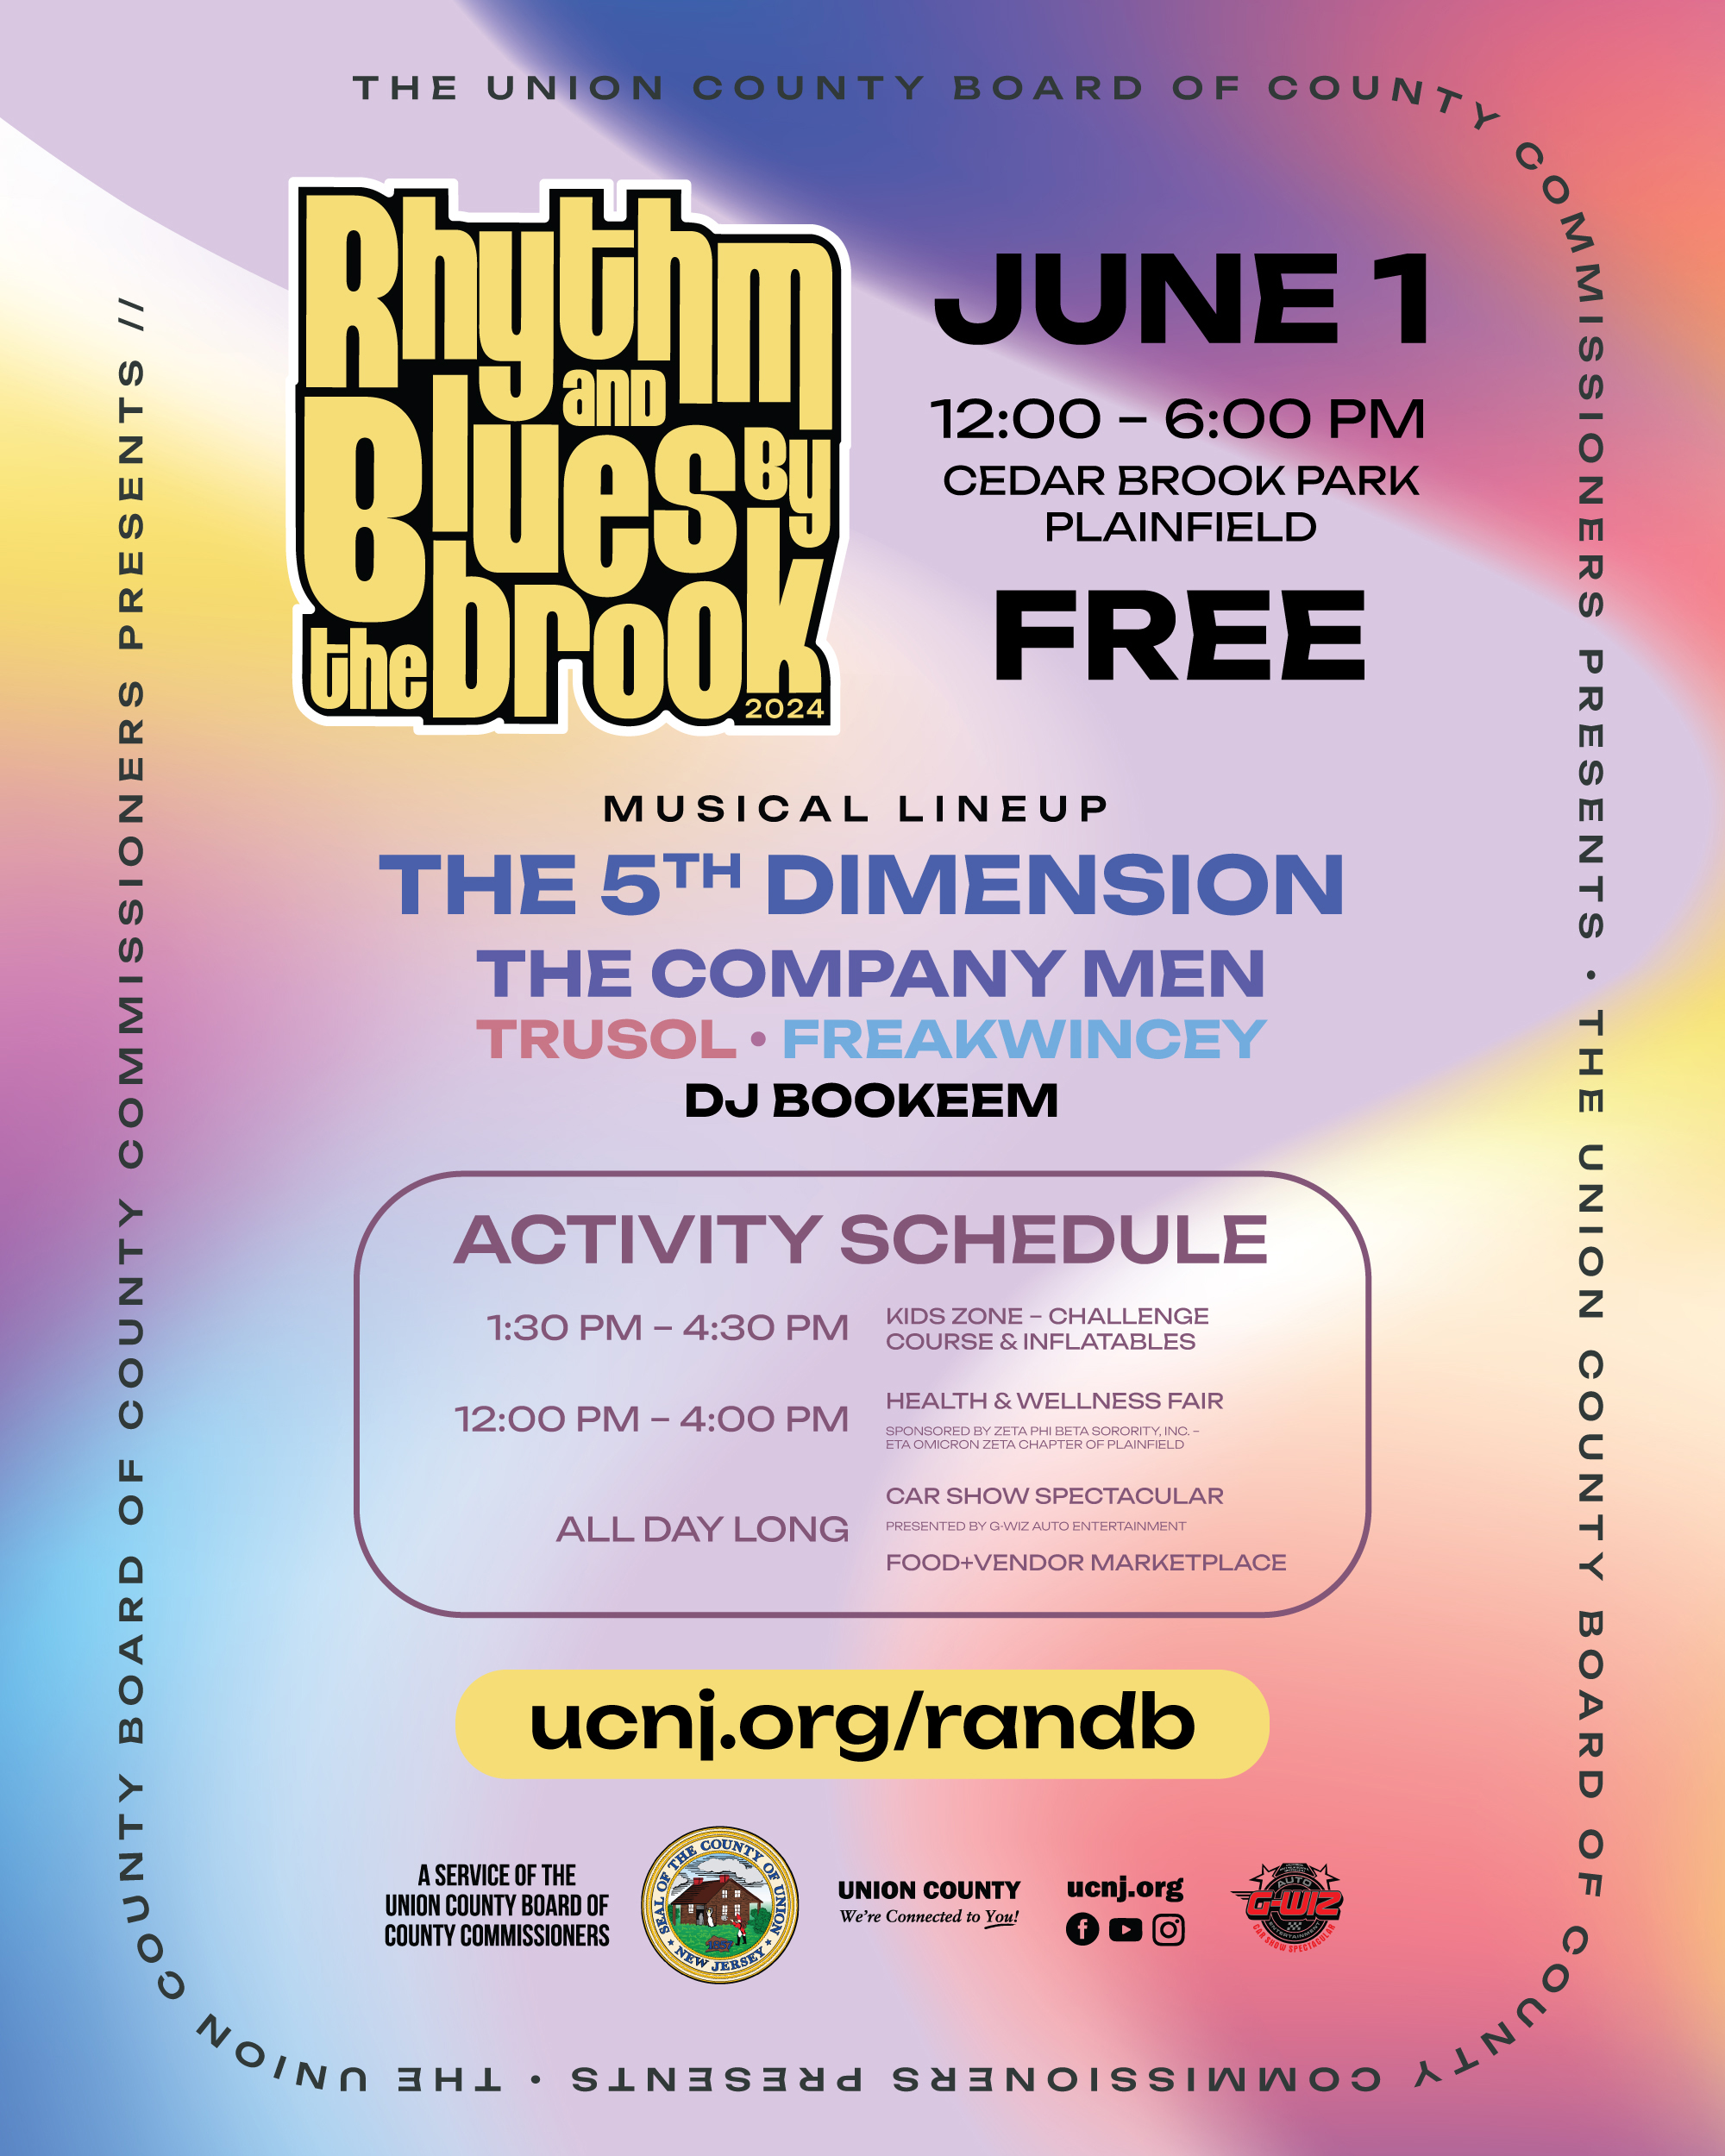 Union County Announces Return of Rhythm & Blues by the Brook in Cedar Brook Park This June